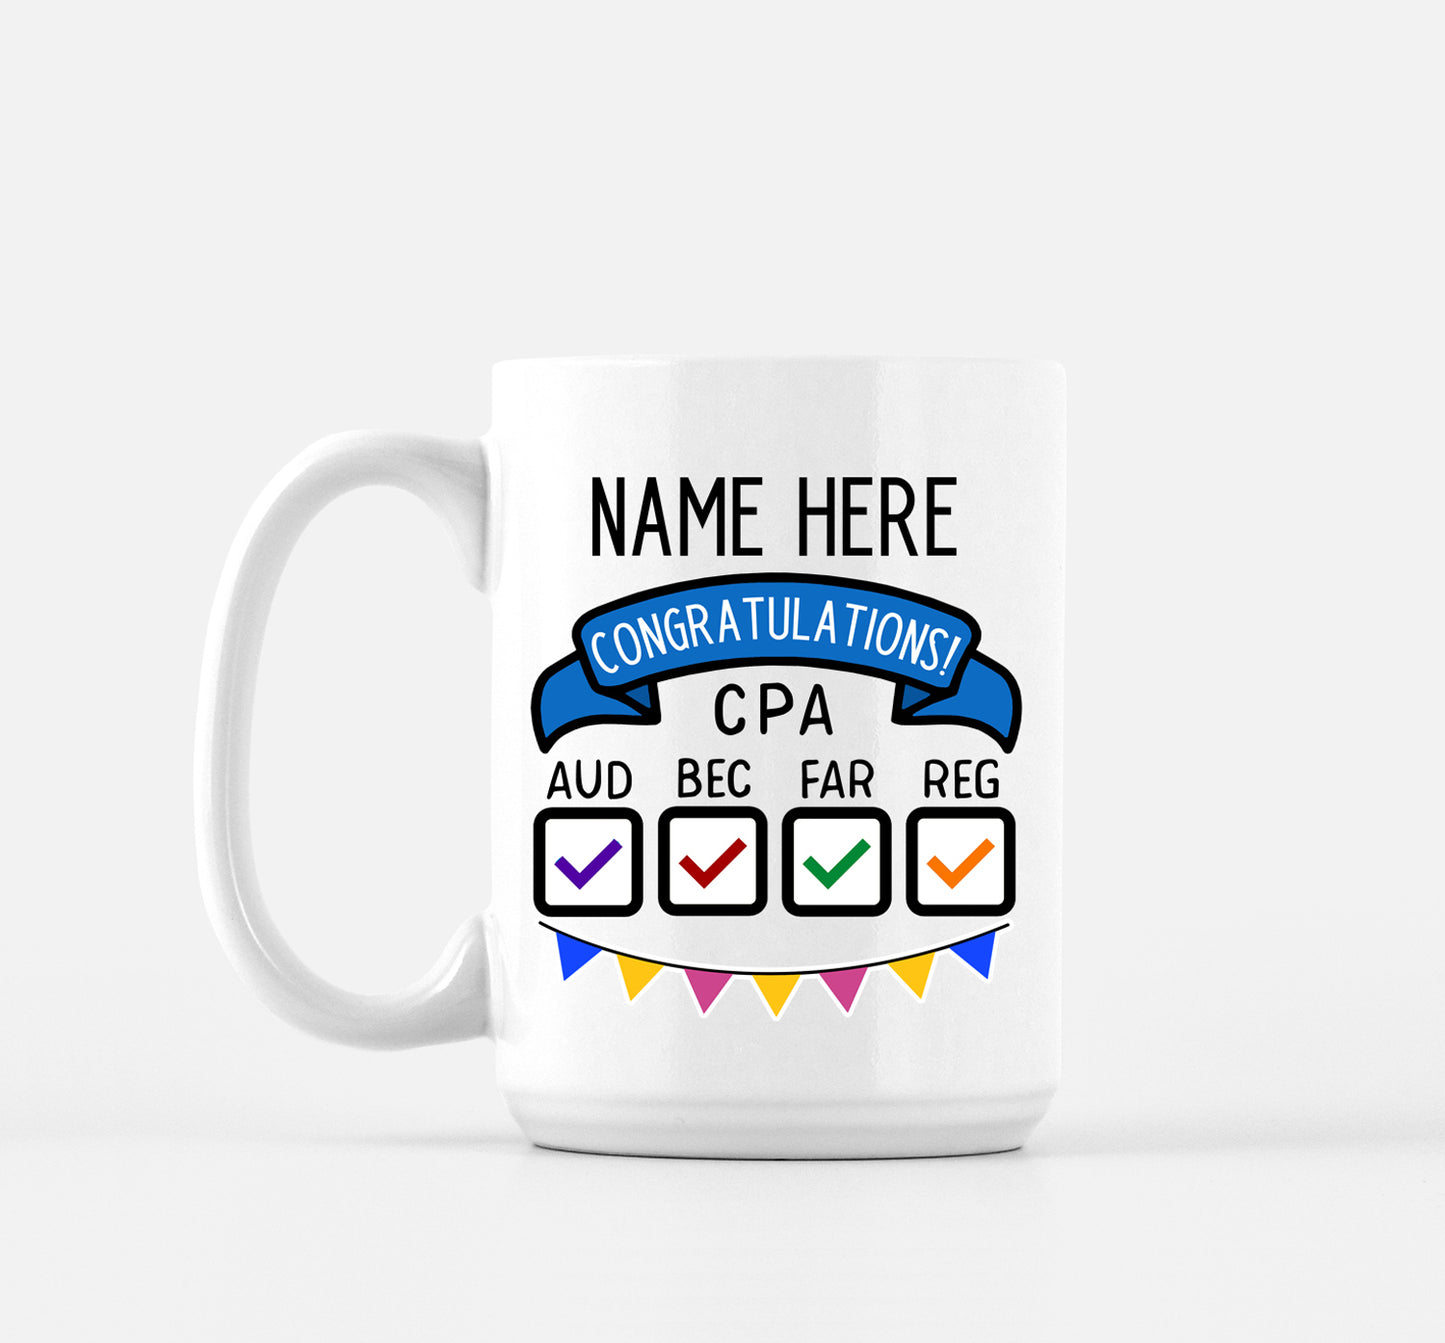 CPA Gift for Passing CPA Exams, Personalized Mug